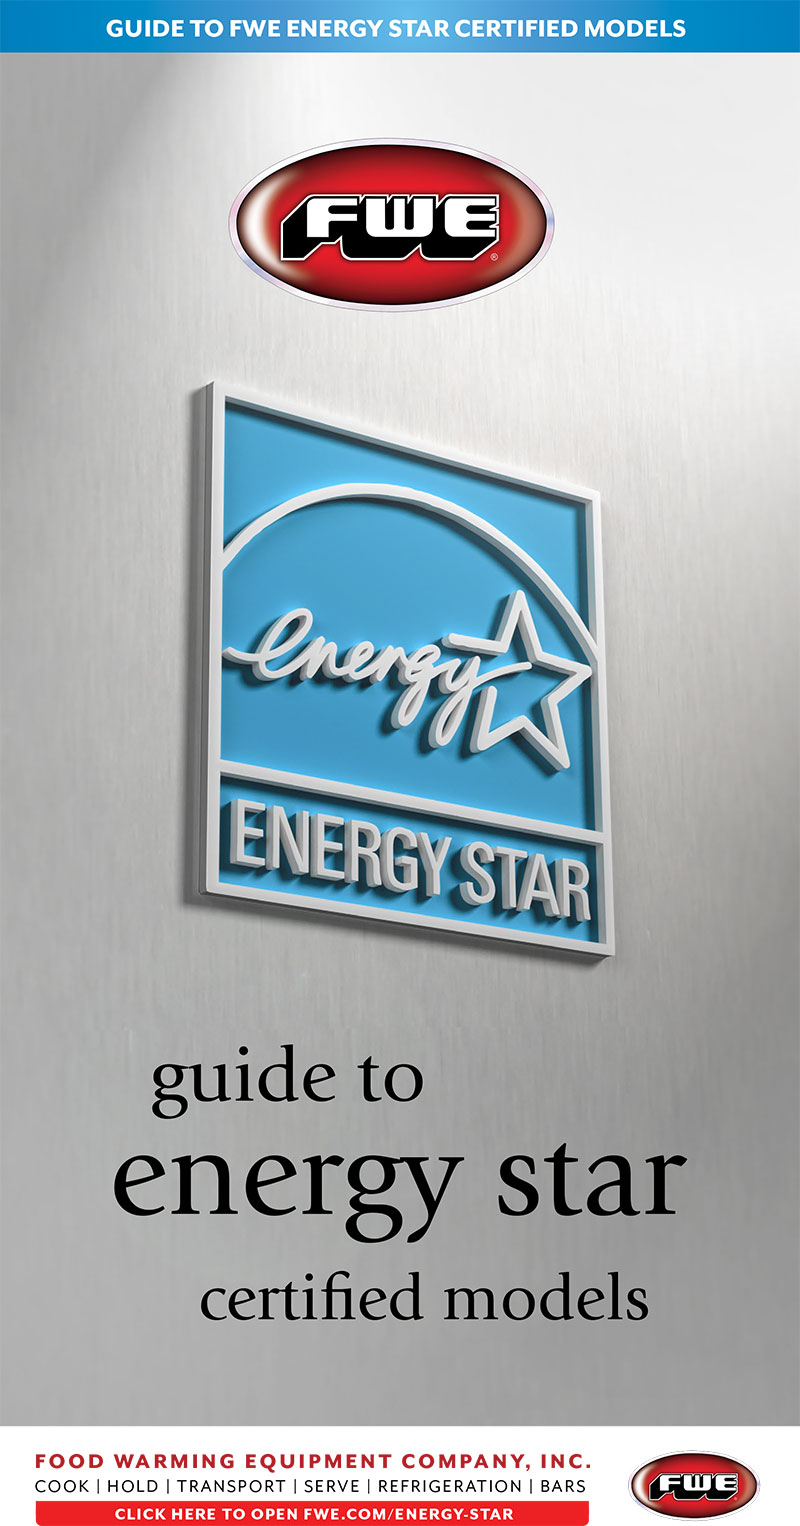 Guide to Energy Star Certified Models